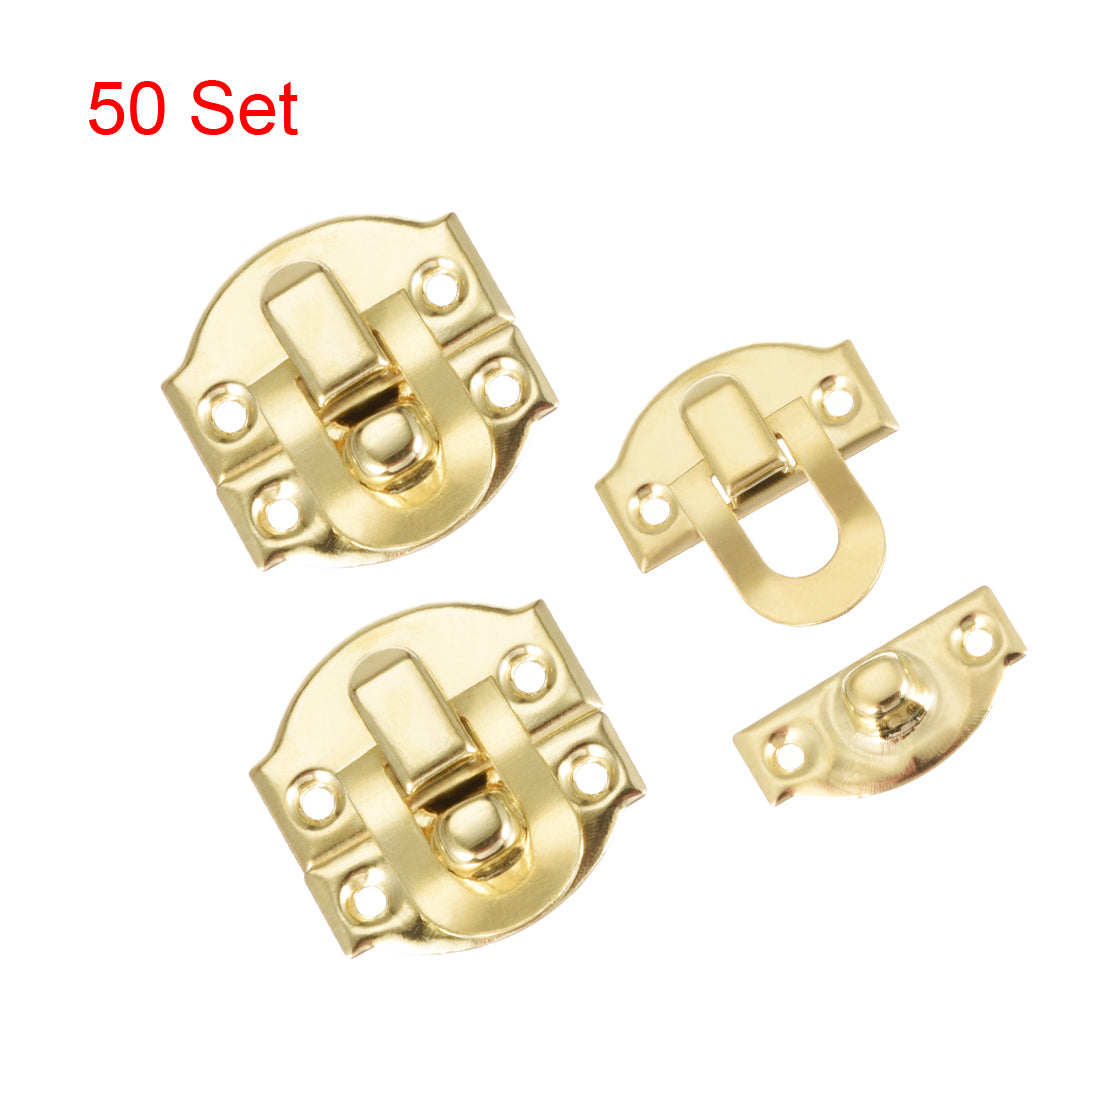 uxcell Uxcell Box Latch, Retro Style Small Size Golden Decorative Hasp Jewelry cases Catch w Screws 50Set